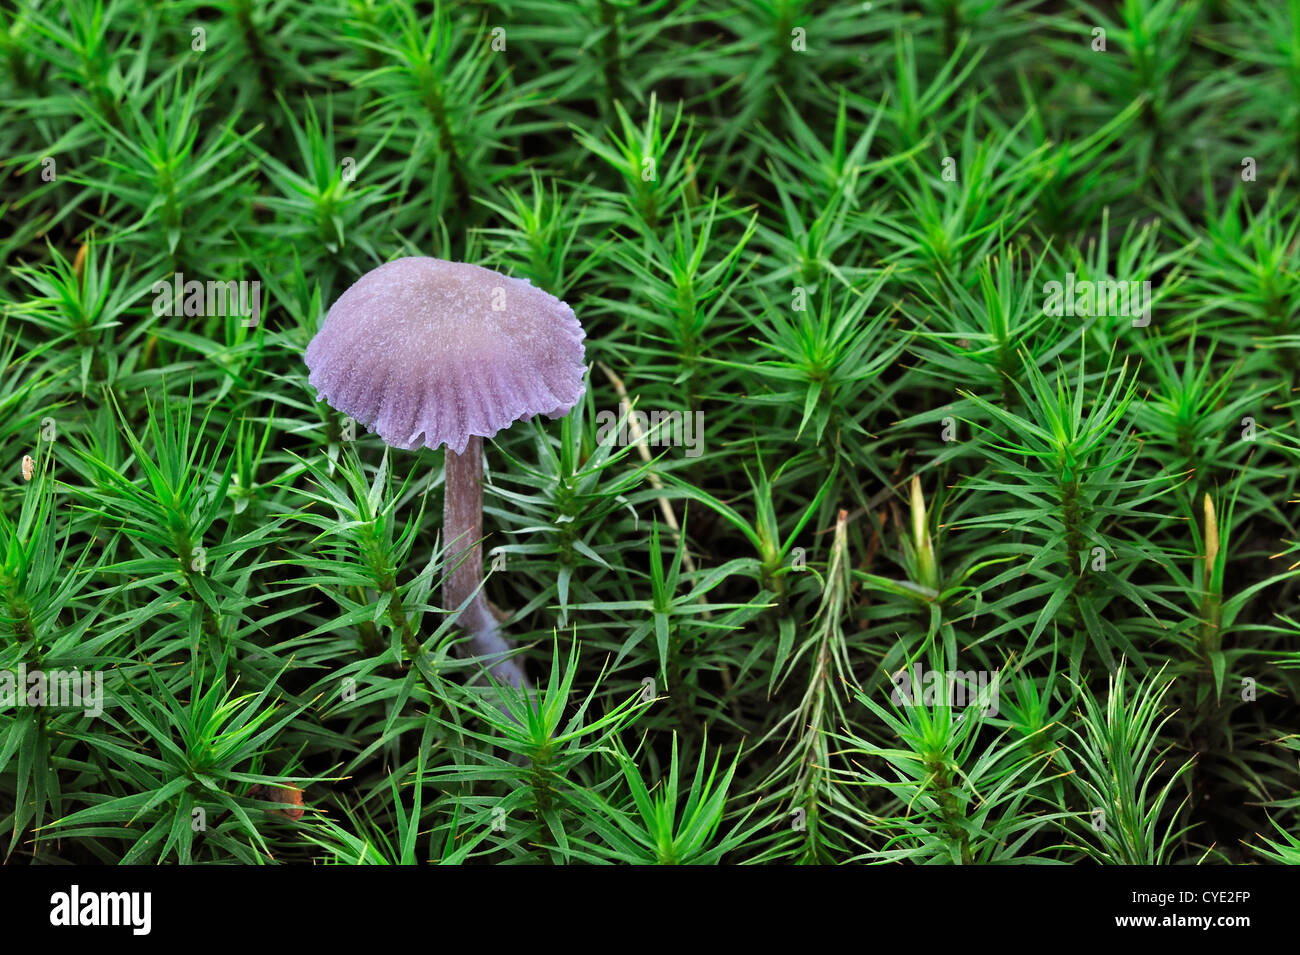 Amethyst deceiver fungus (Laccaria amethystina / Laccaria amethystea) amongst moss in autumn forest Stock Photo